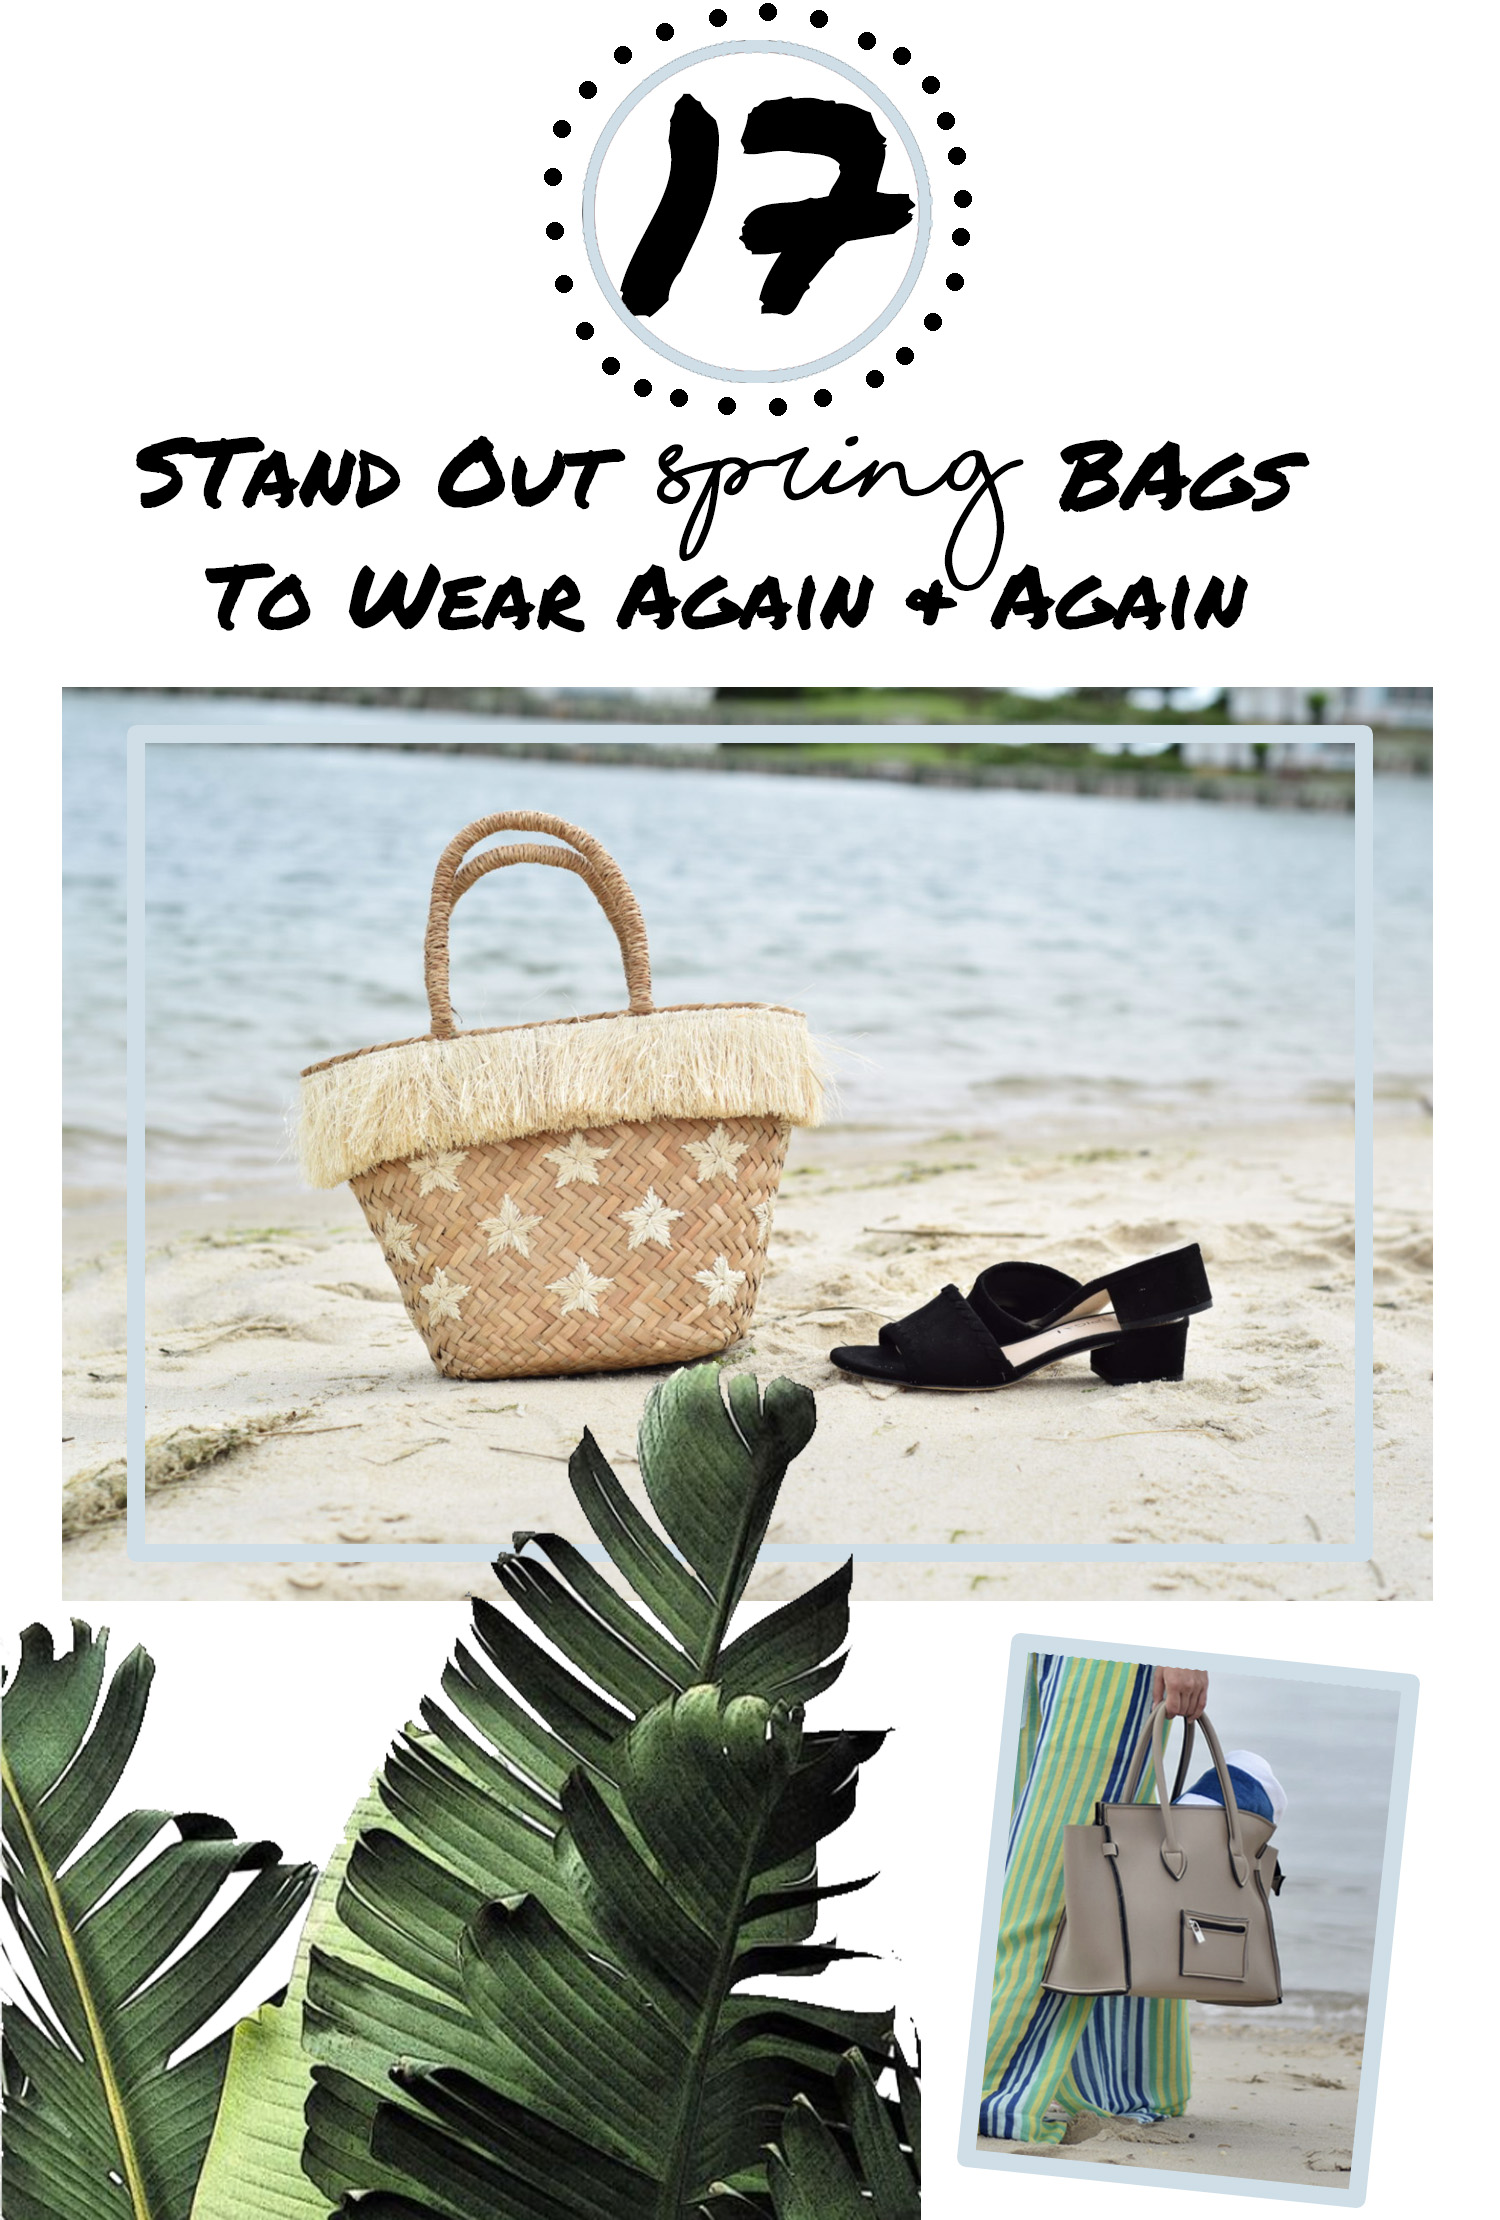 17 Stand Out Spring Bags To Wear Again & Again!